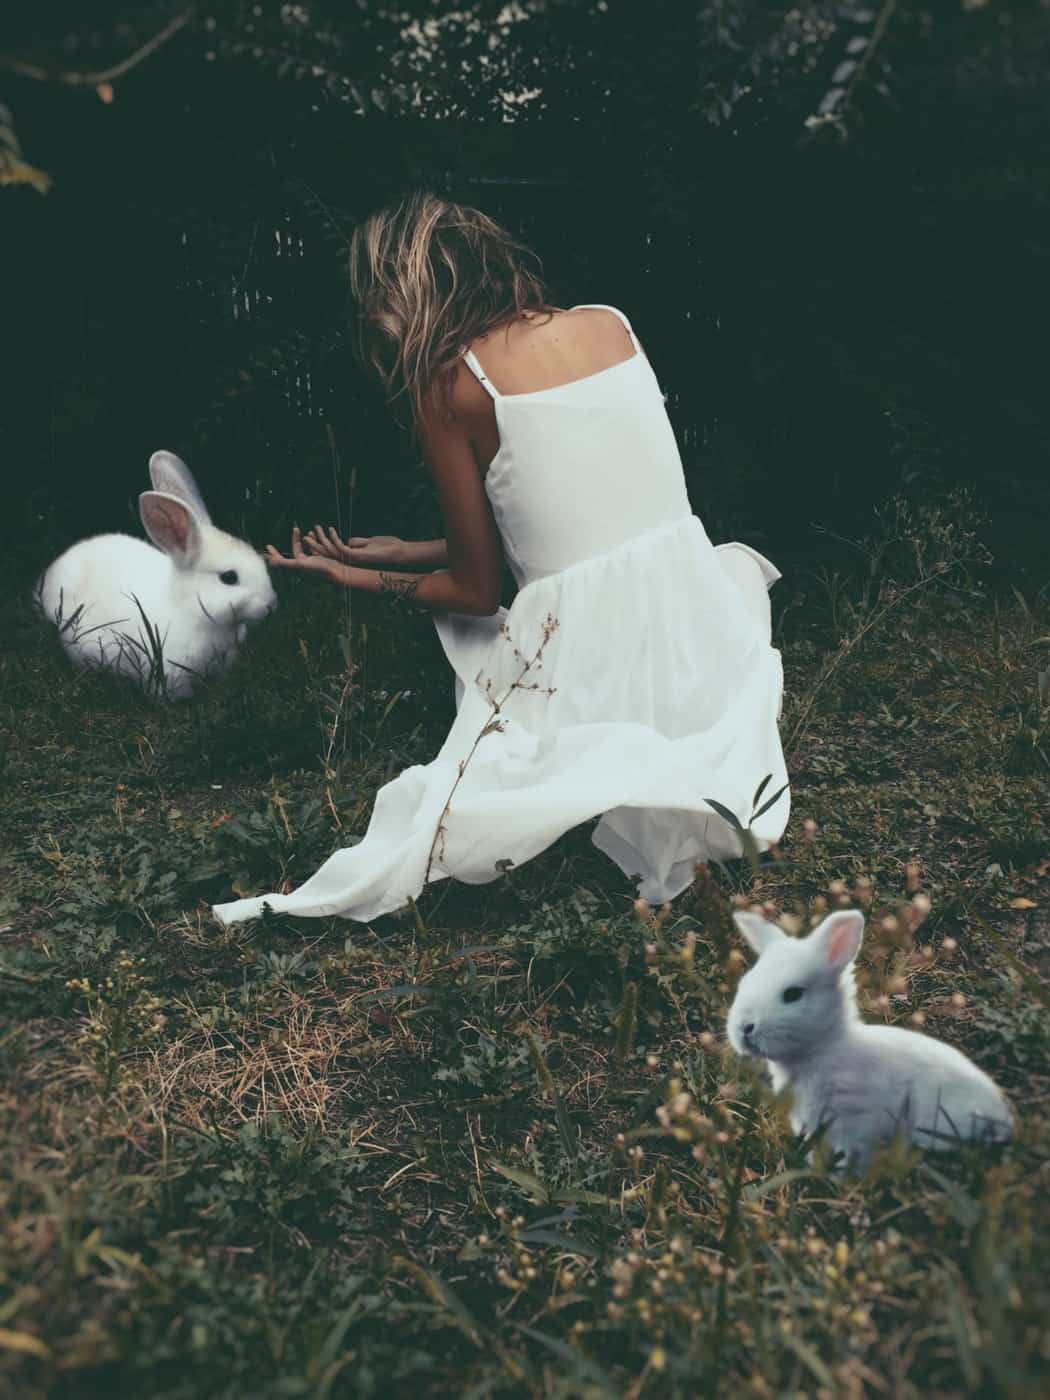 Woman in white dress crouched down towards white bunny in grassy field with another bunny in foreground